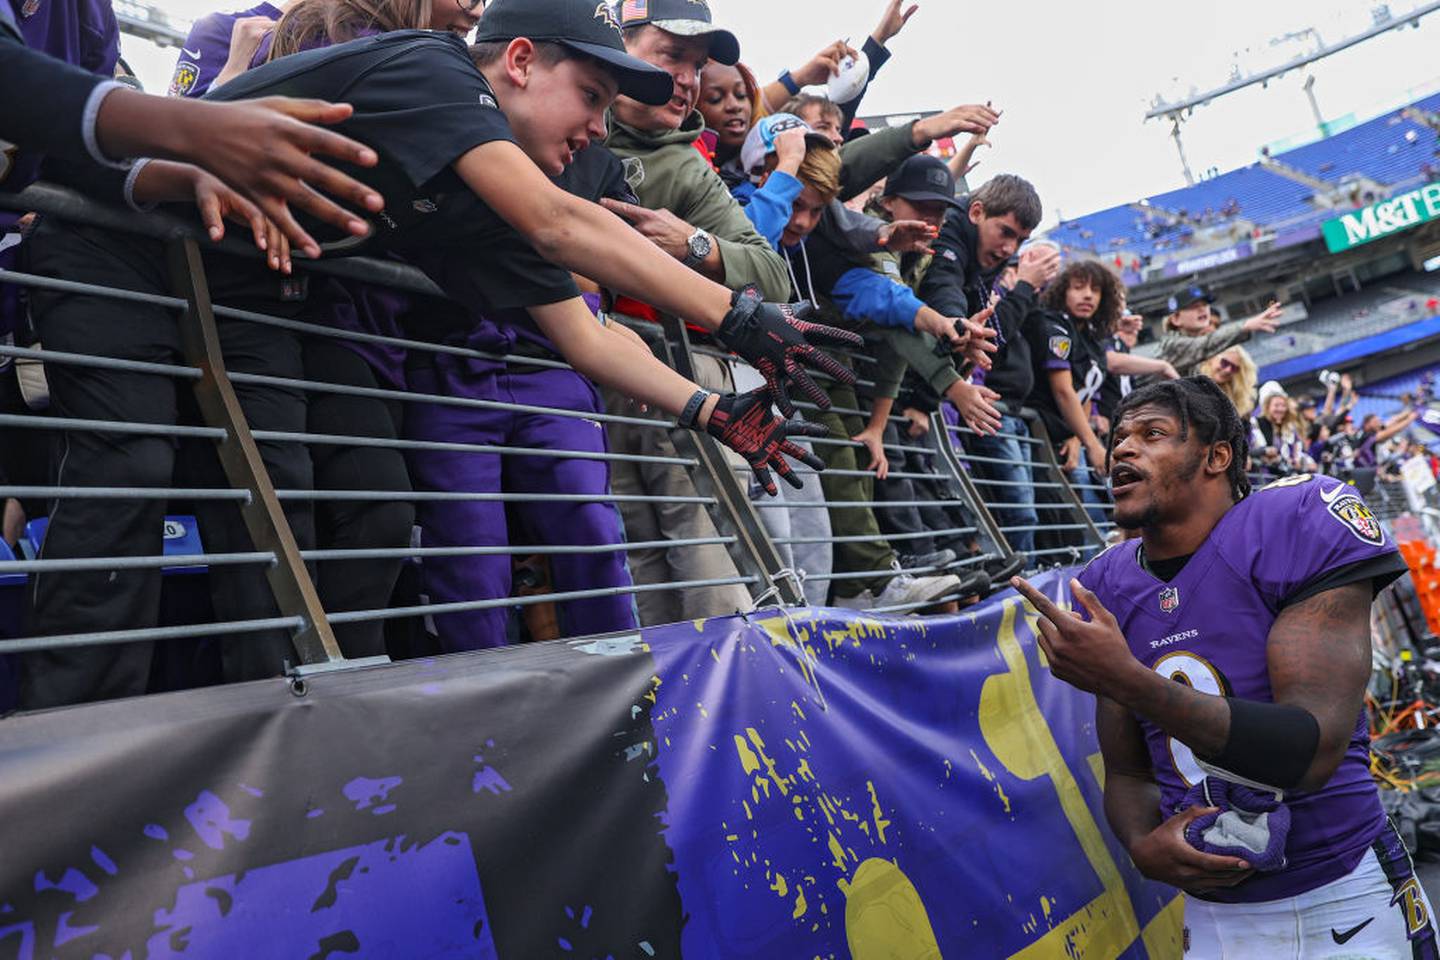 BALTIMORE, MARYLAND - OCTOBER 17: Quarterback Lamar Jackson #8 of the Baltimore Ravens greets fans after winning against the Los Angeles Chargers during the first half at M&T Bank Stadium on October 17, 2021 in Baltimore, Maryland.